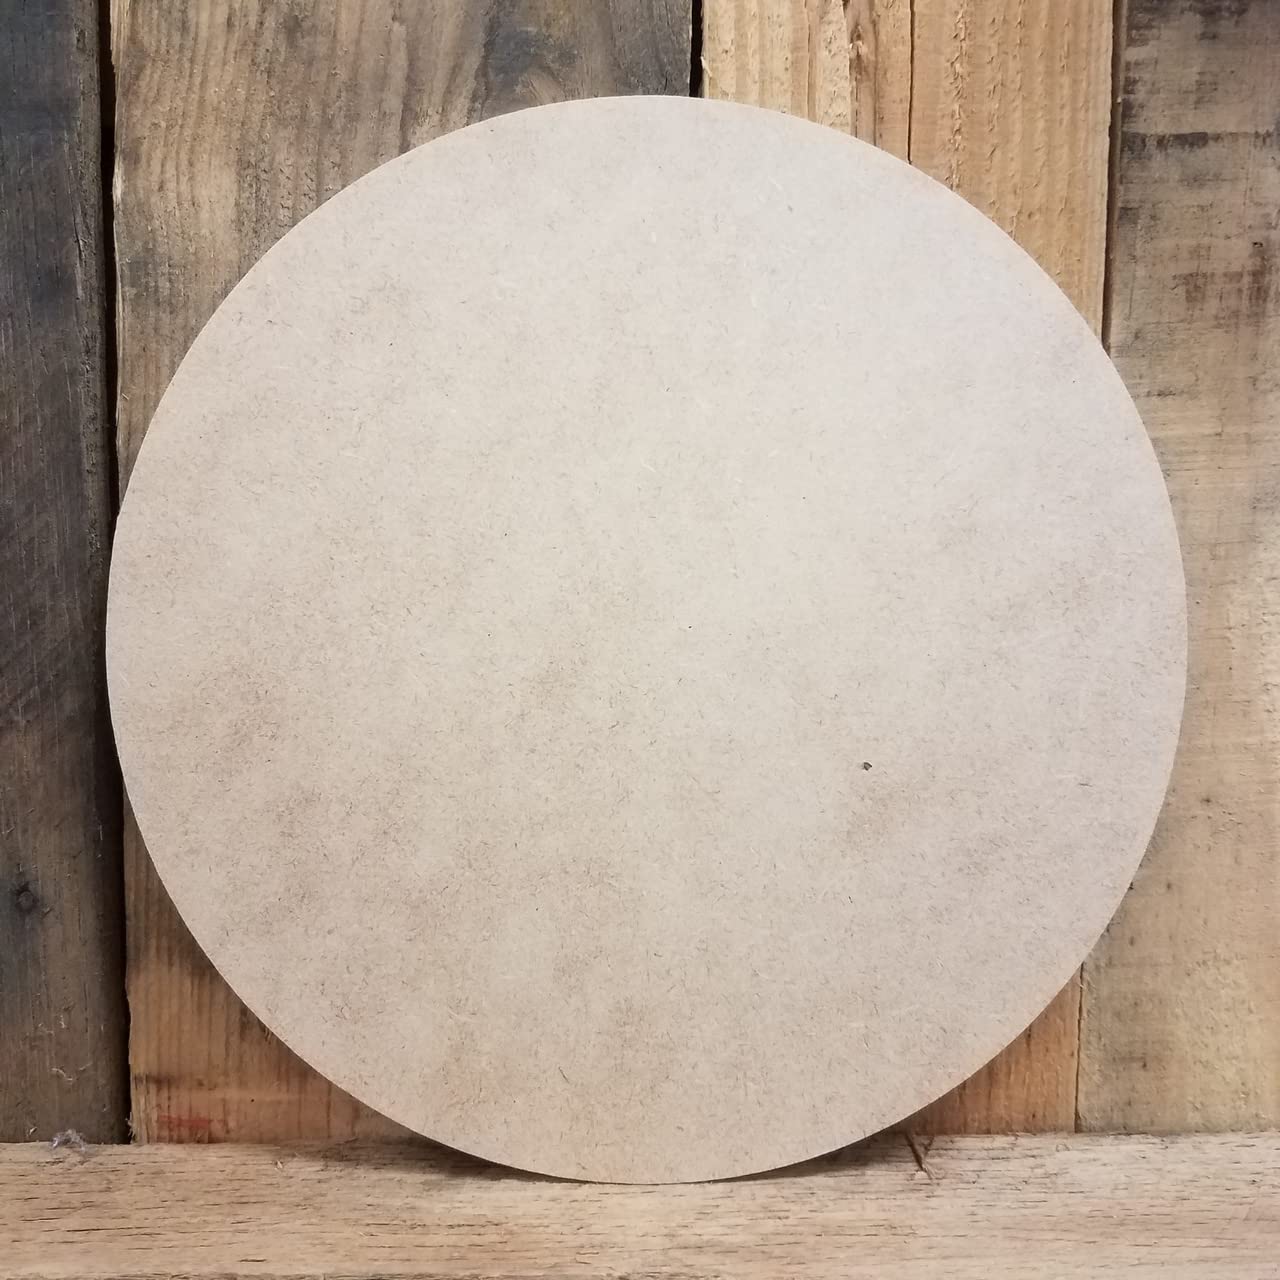 14" x 1/8" Wooden Circle Shape, Unfinished Wood Craft, Build-A-Cross